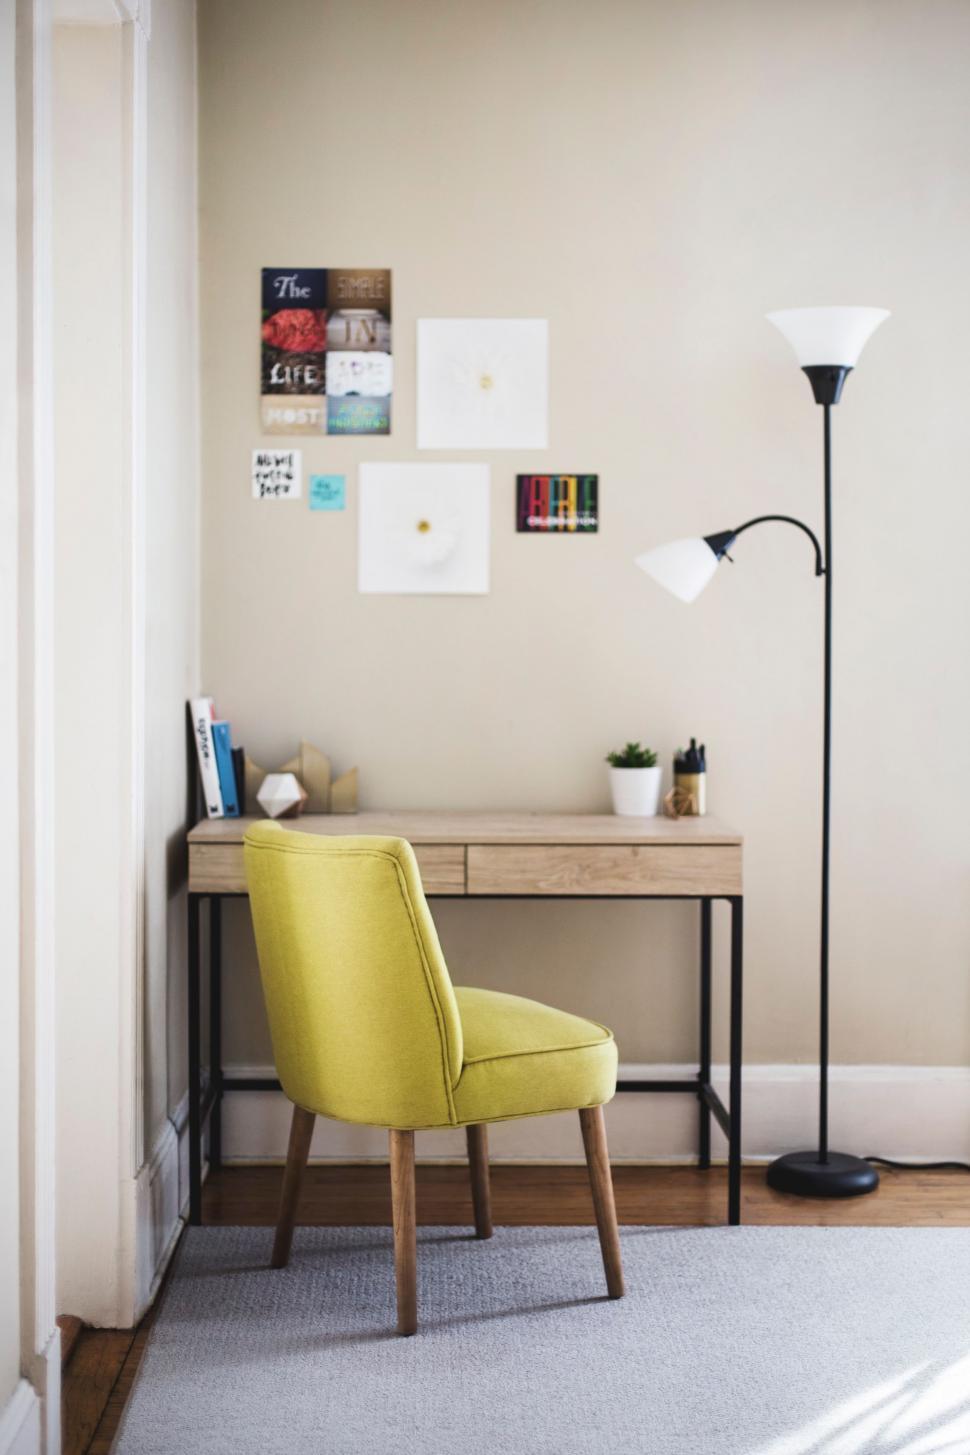 Free Image of Yellow Chair in Front of Desk 